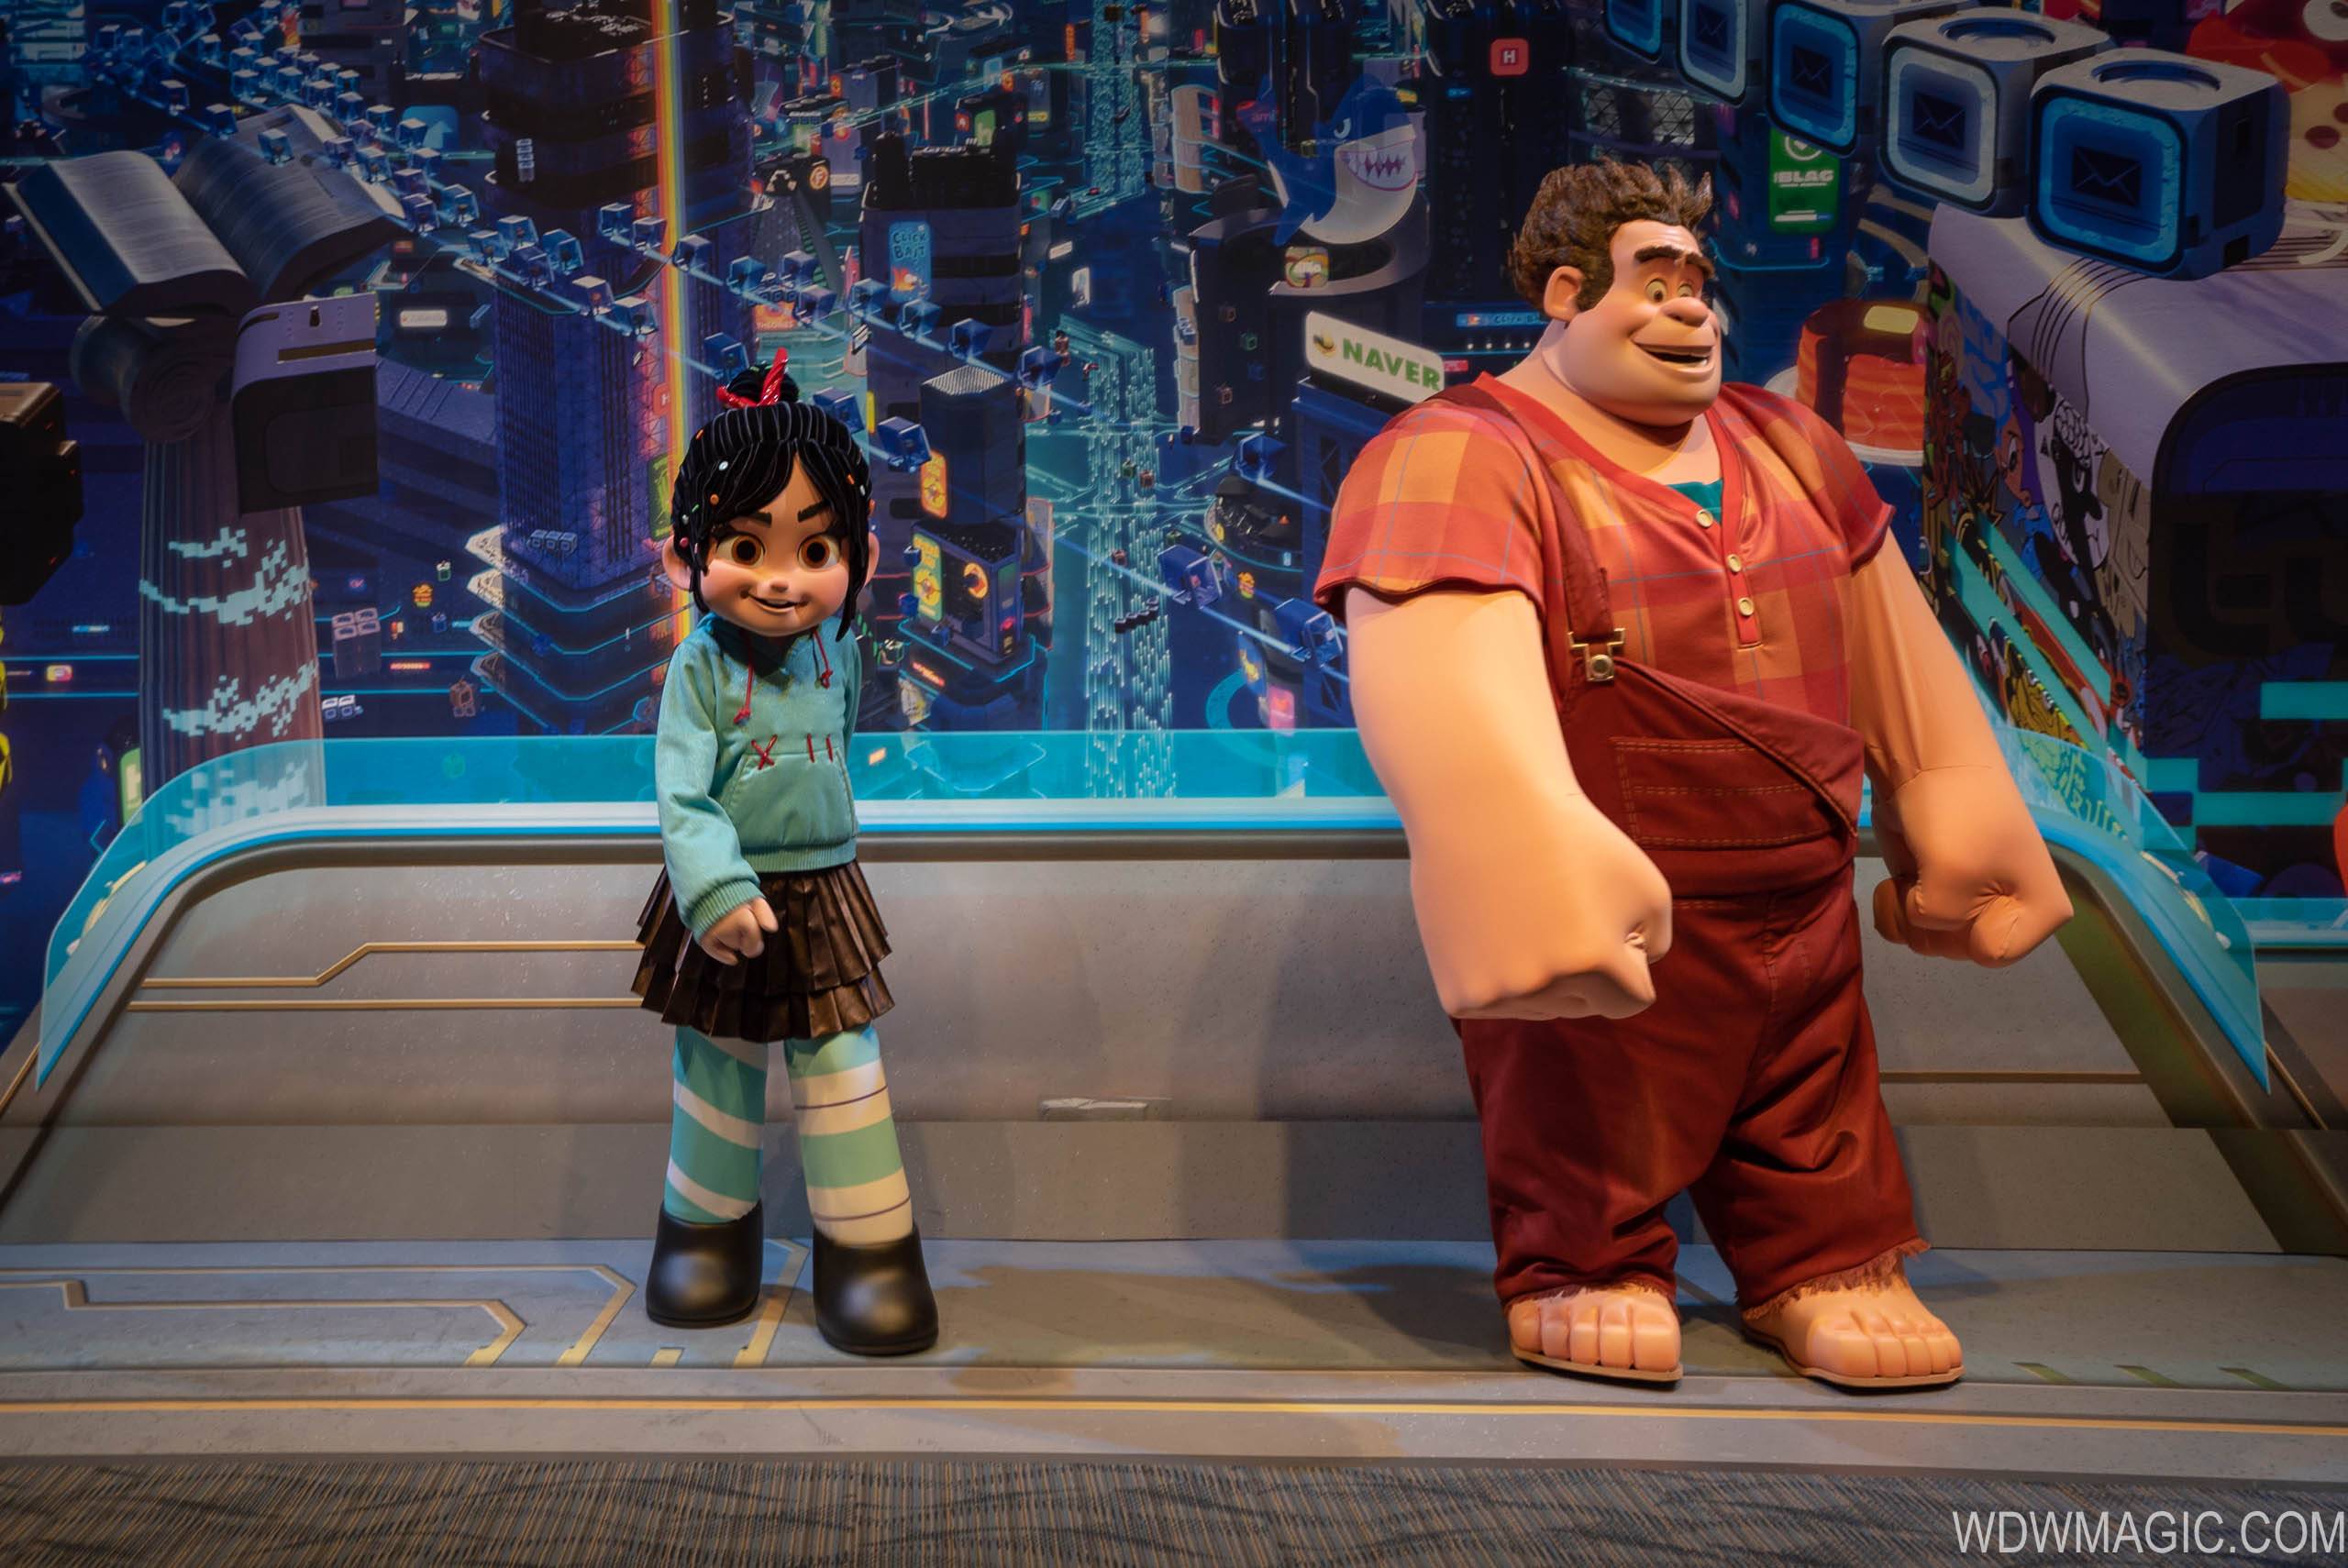 Wreck It Ralph and Vanellope meet and greet at Epcot